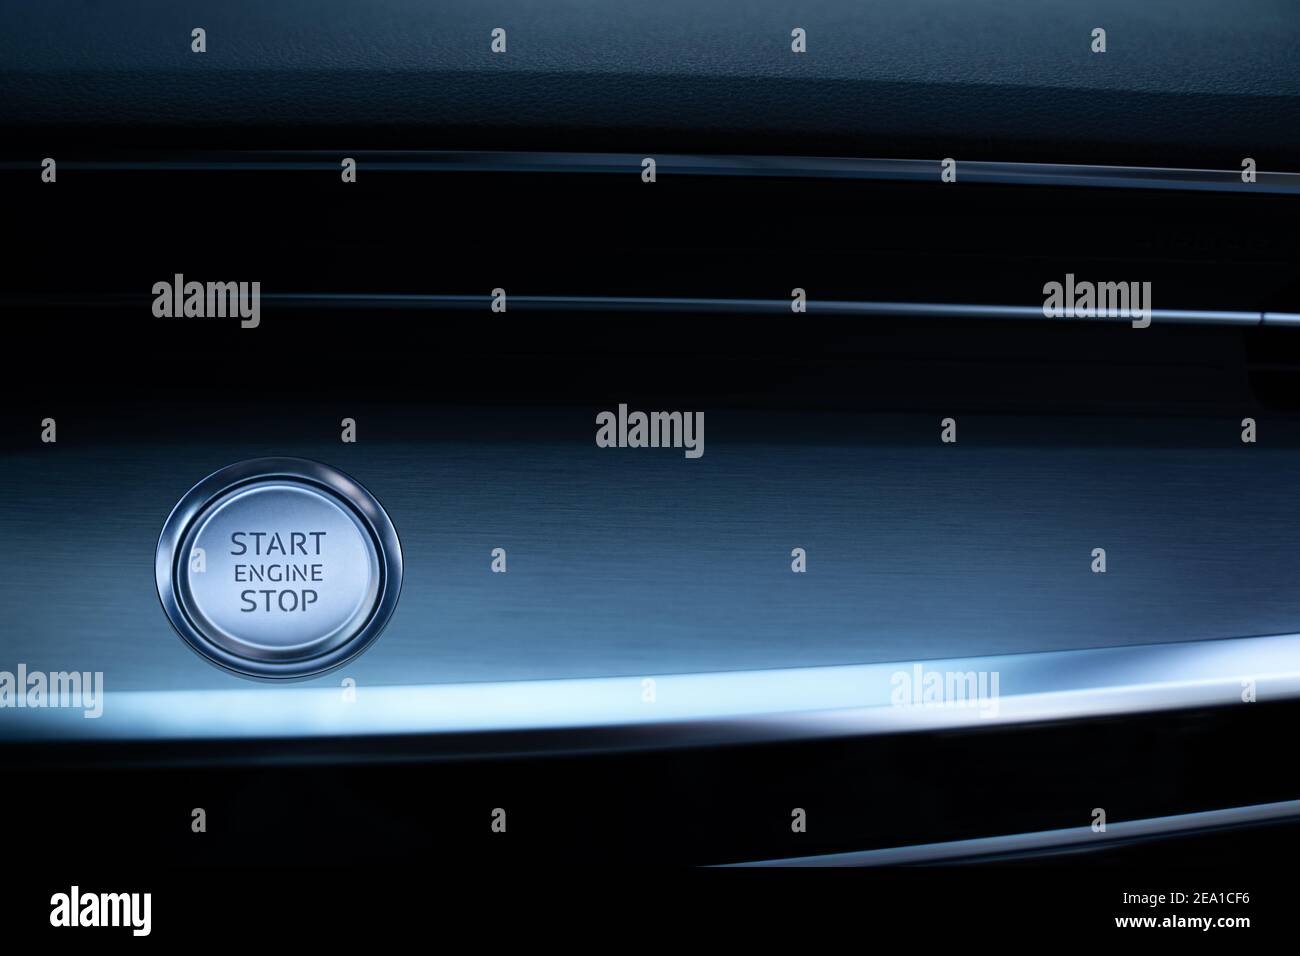 Engine start stop button. Car driver starting the engine. Stock Photo